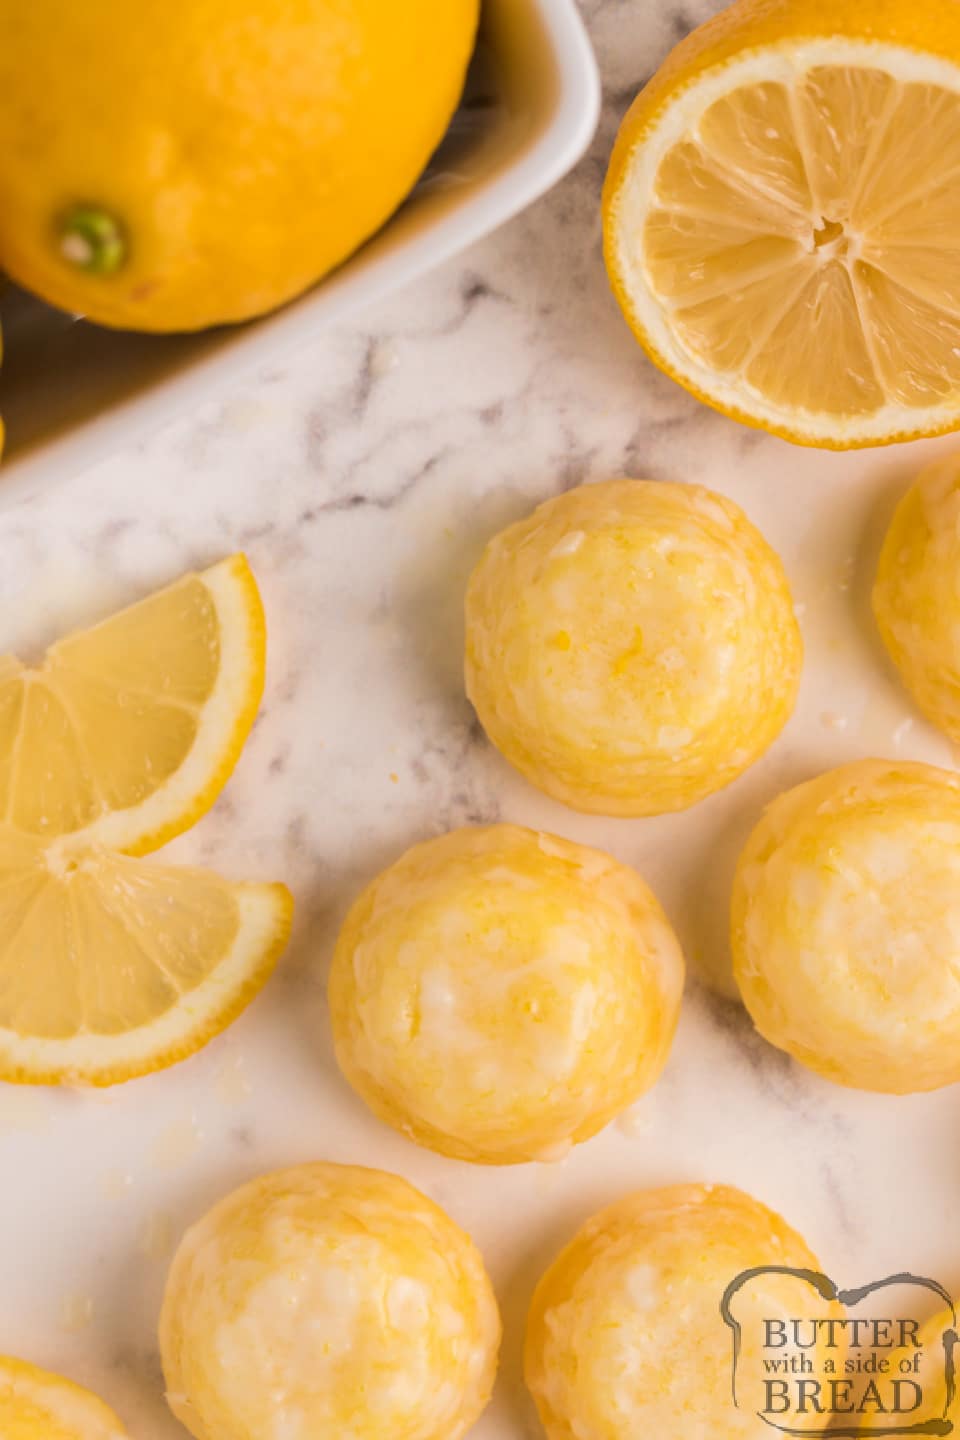 Mini Lemon Drop Cupcakes are delicious bite-sized treats that start with a lemon cake mix! The easy lemon glaze soaks into the inverted mini cupcakes and is a simple, incredibly delicious lemon cake mix recipe!